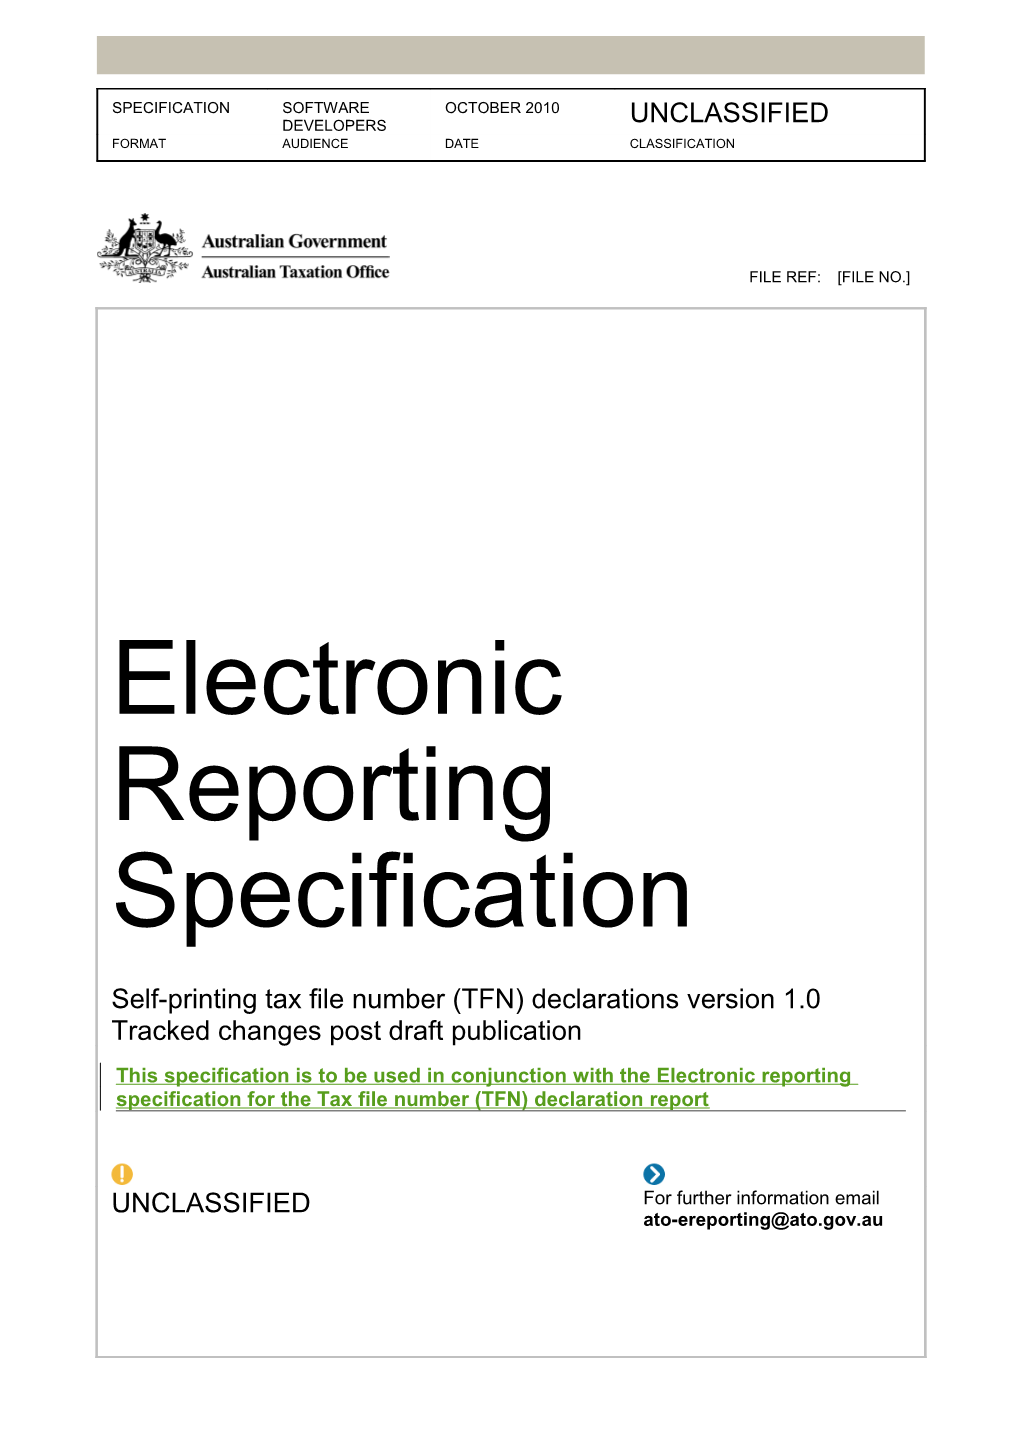 Electronic Reporting Specification